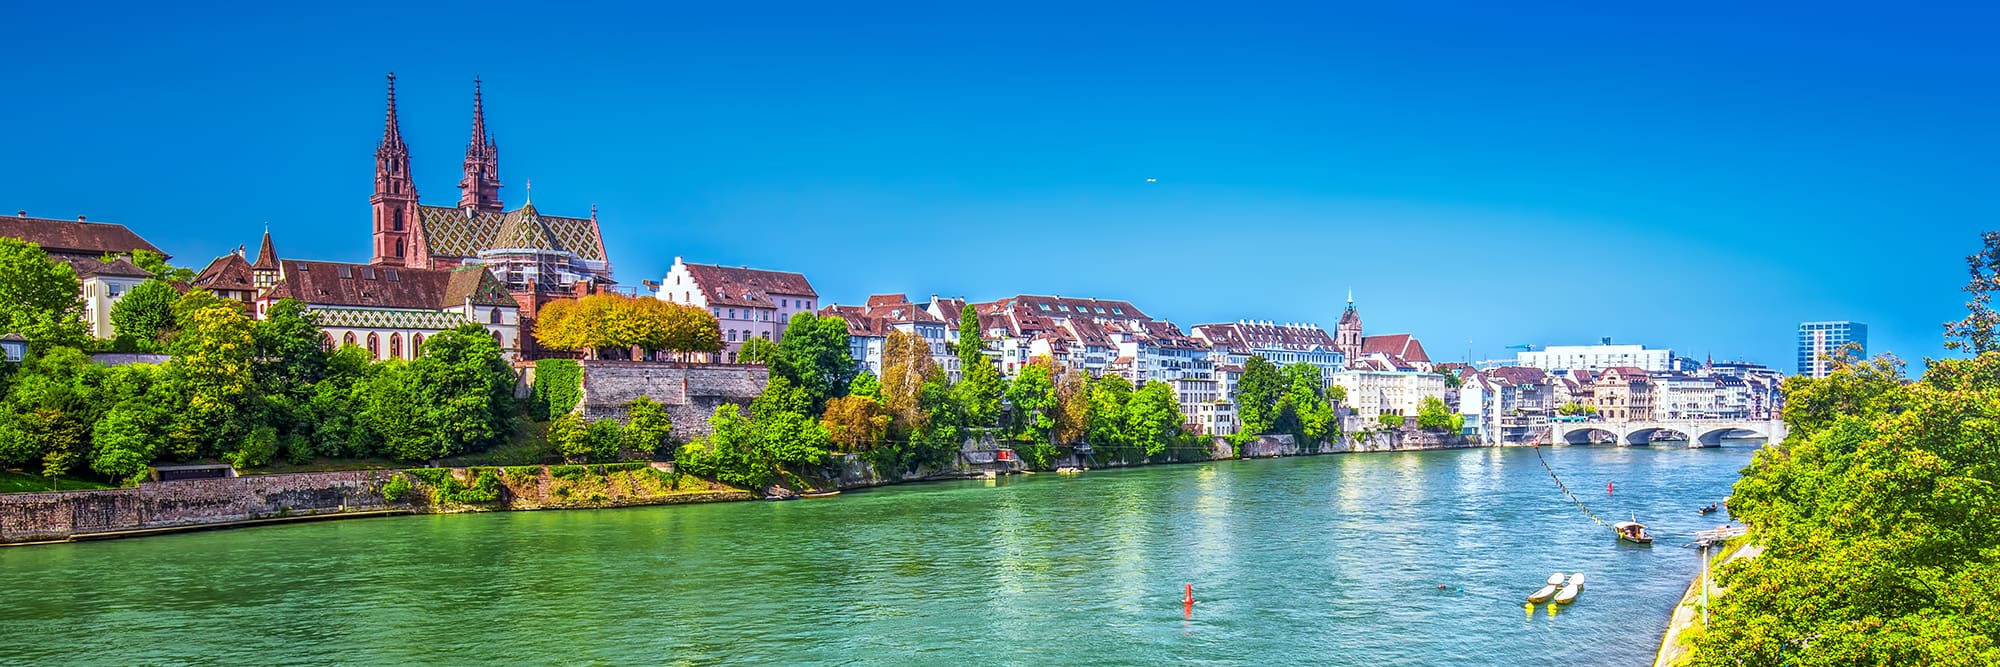 Sail down the Rhine River visiting exciting ports like Basel